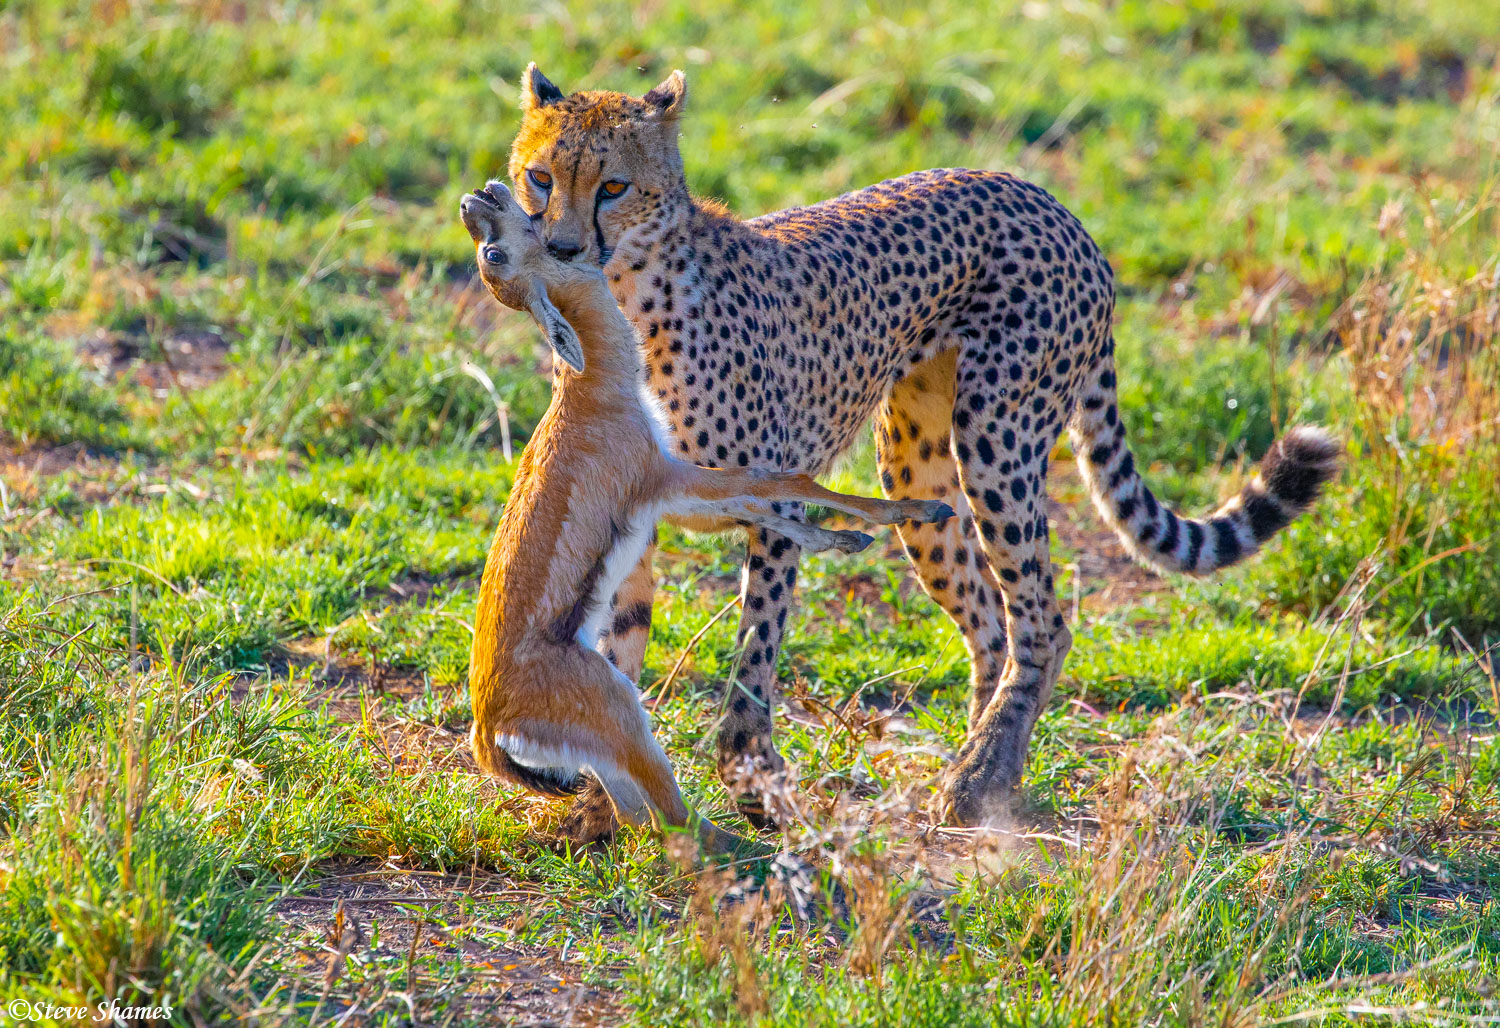 Here she is carrying the gazelle back to her cub. She does not kill it, but keeps it alive.